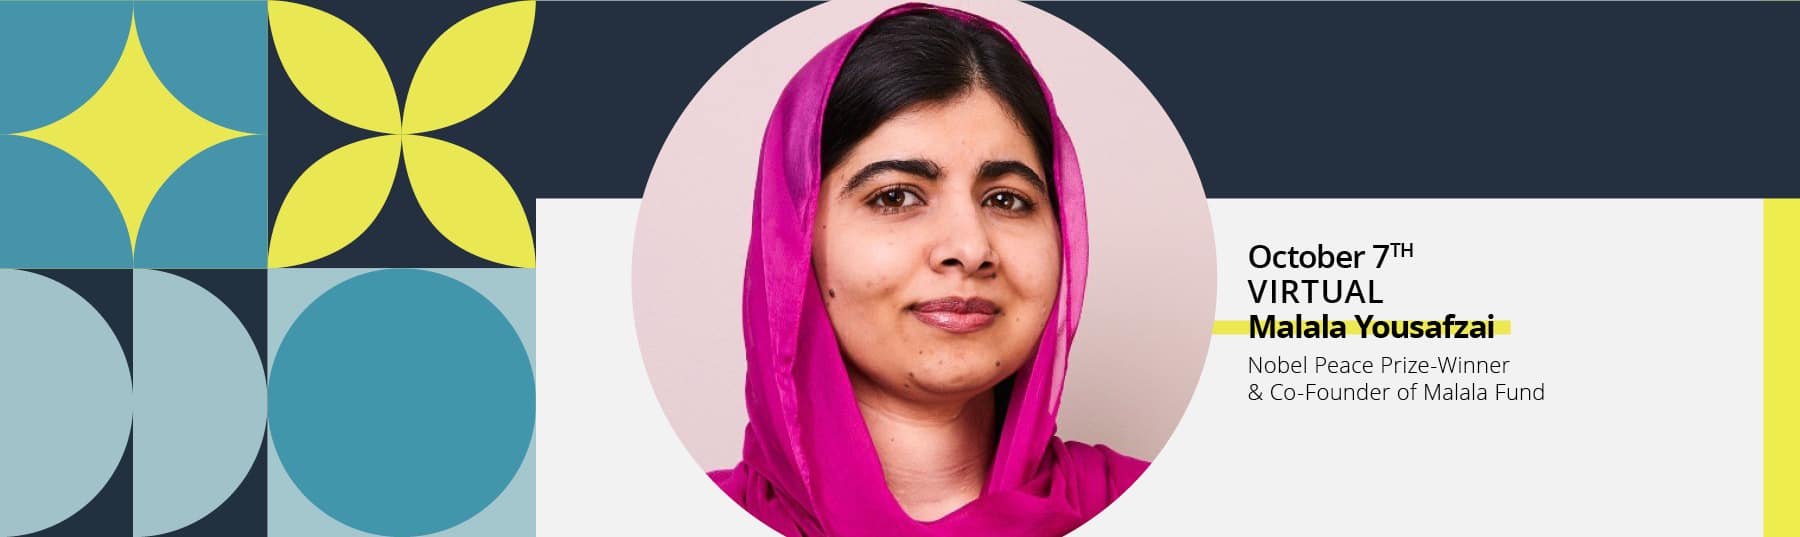 Join Malala Yousafzai virtually at the PA Conference for Women on October 7th!